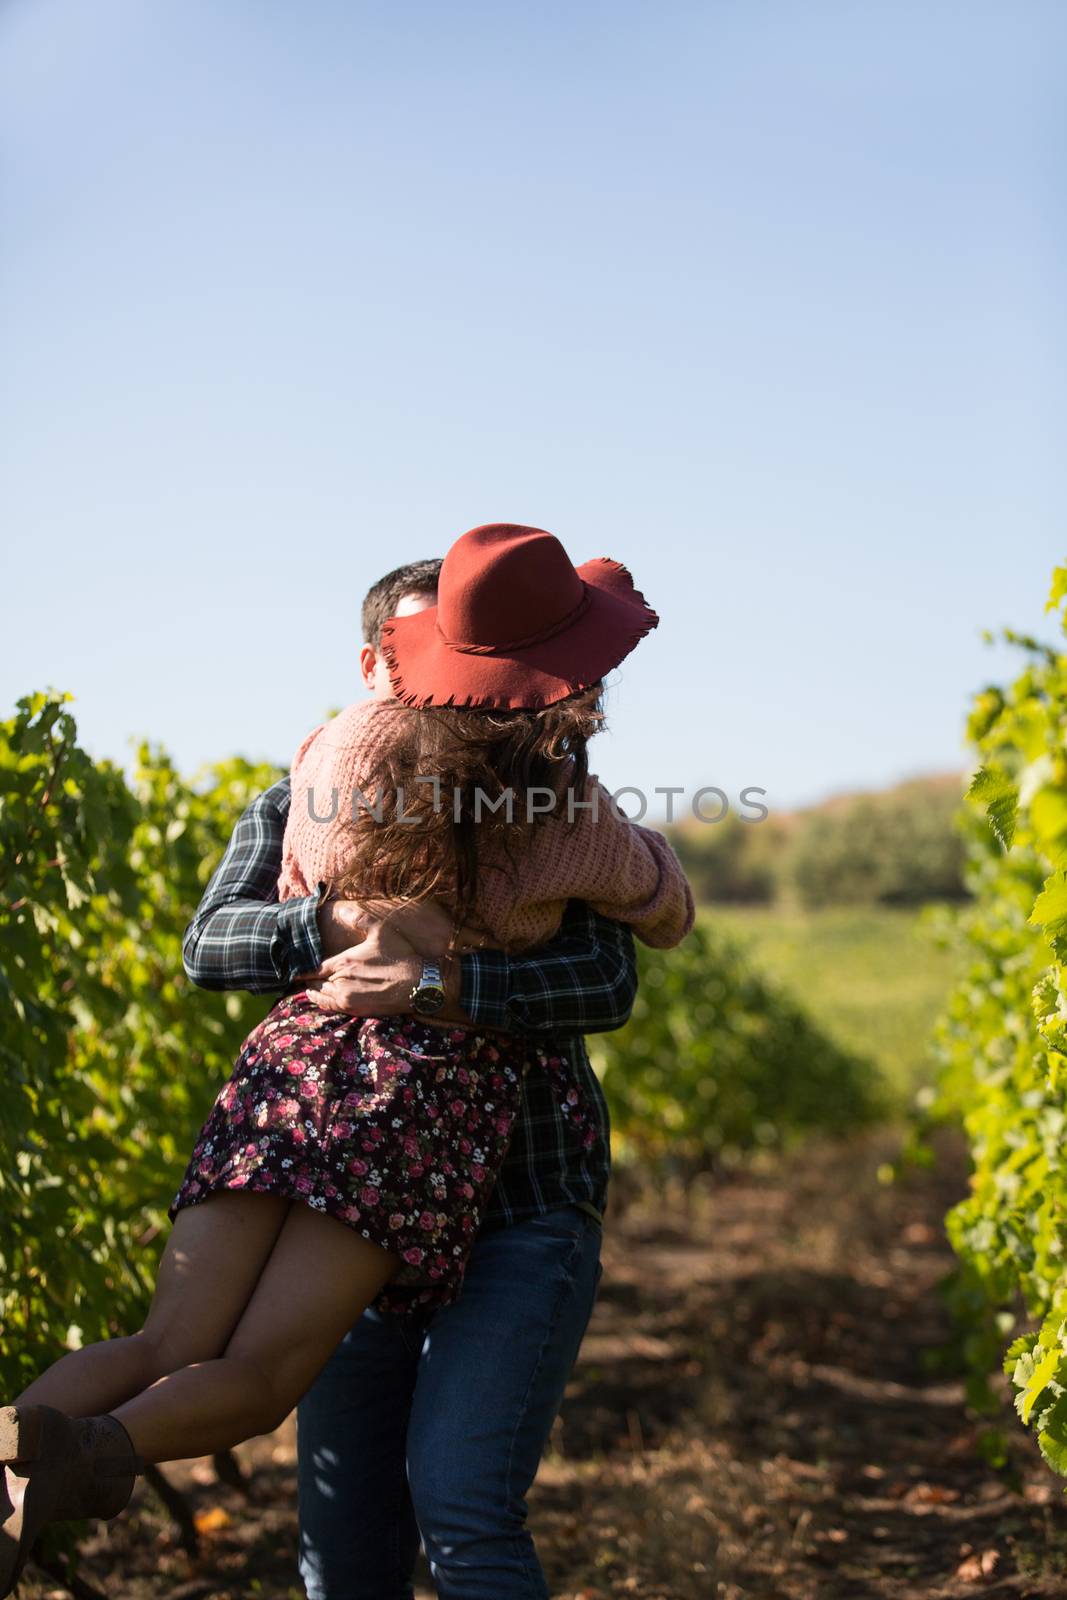 Cheerful young couple having a romantic moment in a vinyard. Woman with stylish hat in vinyard.